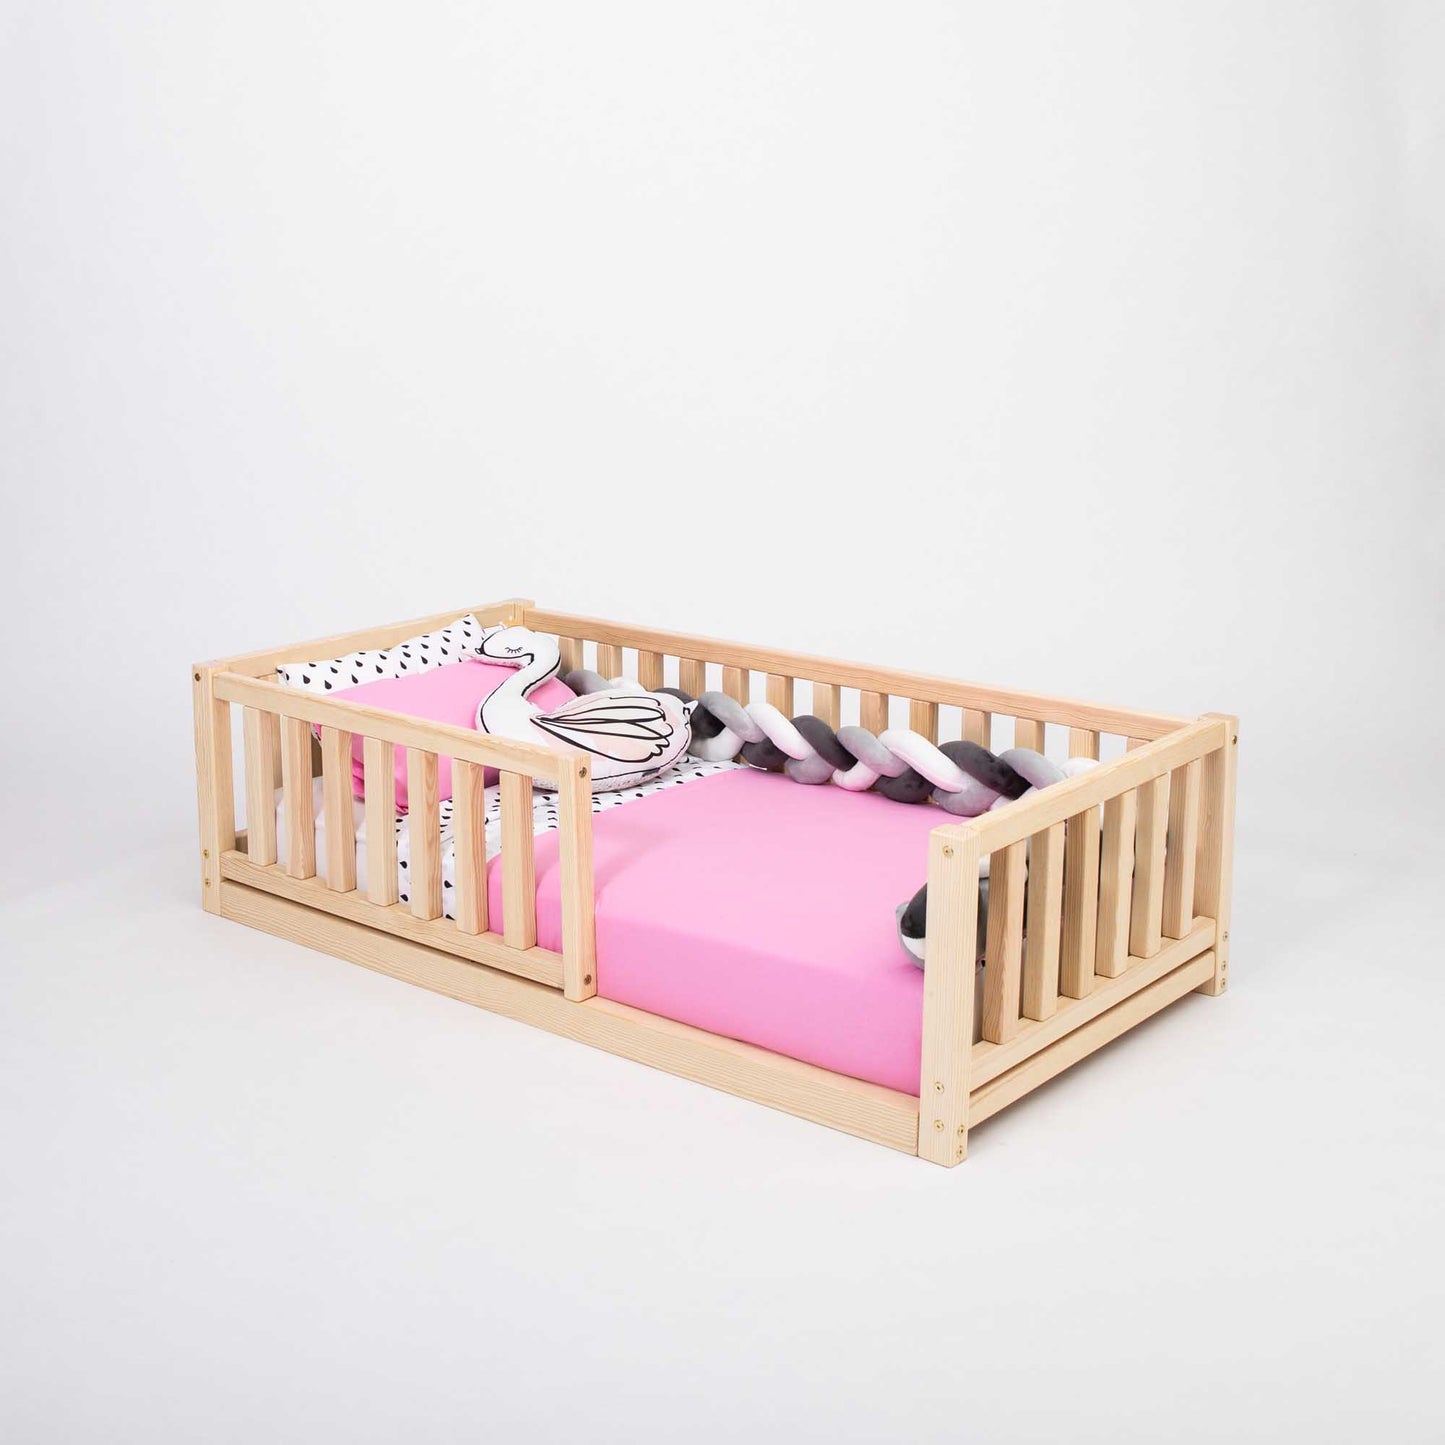 A Sweet Home From Wood 2-in-1 toddler bed on legs with a vertical rail fence and a pink sheet.